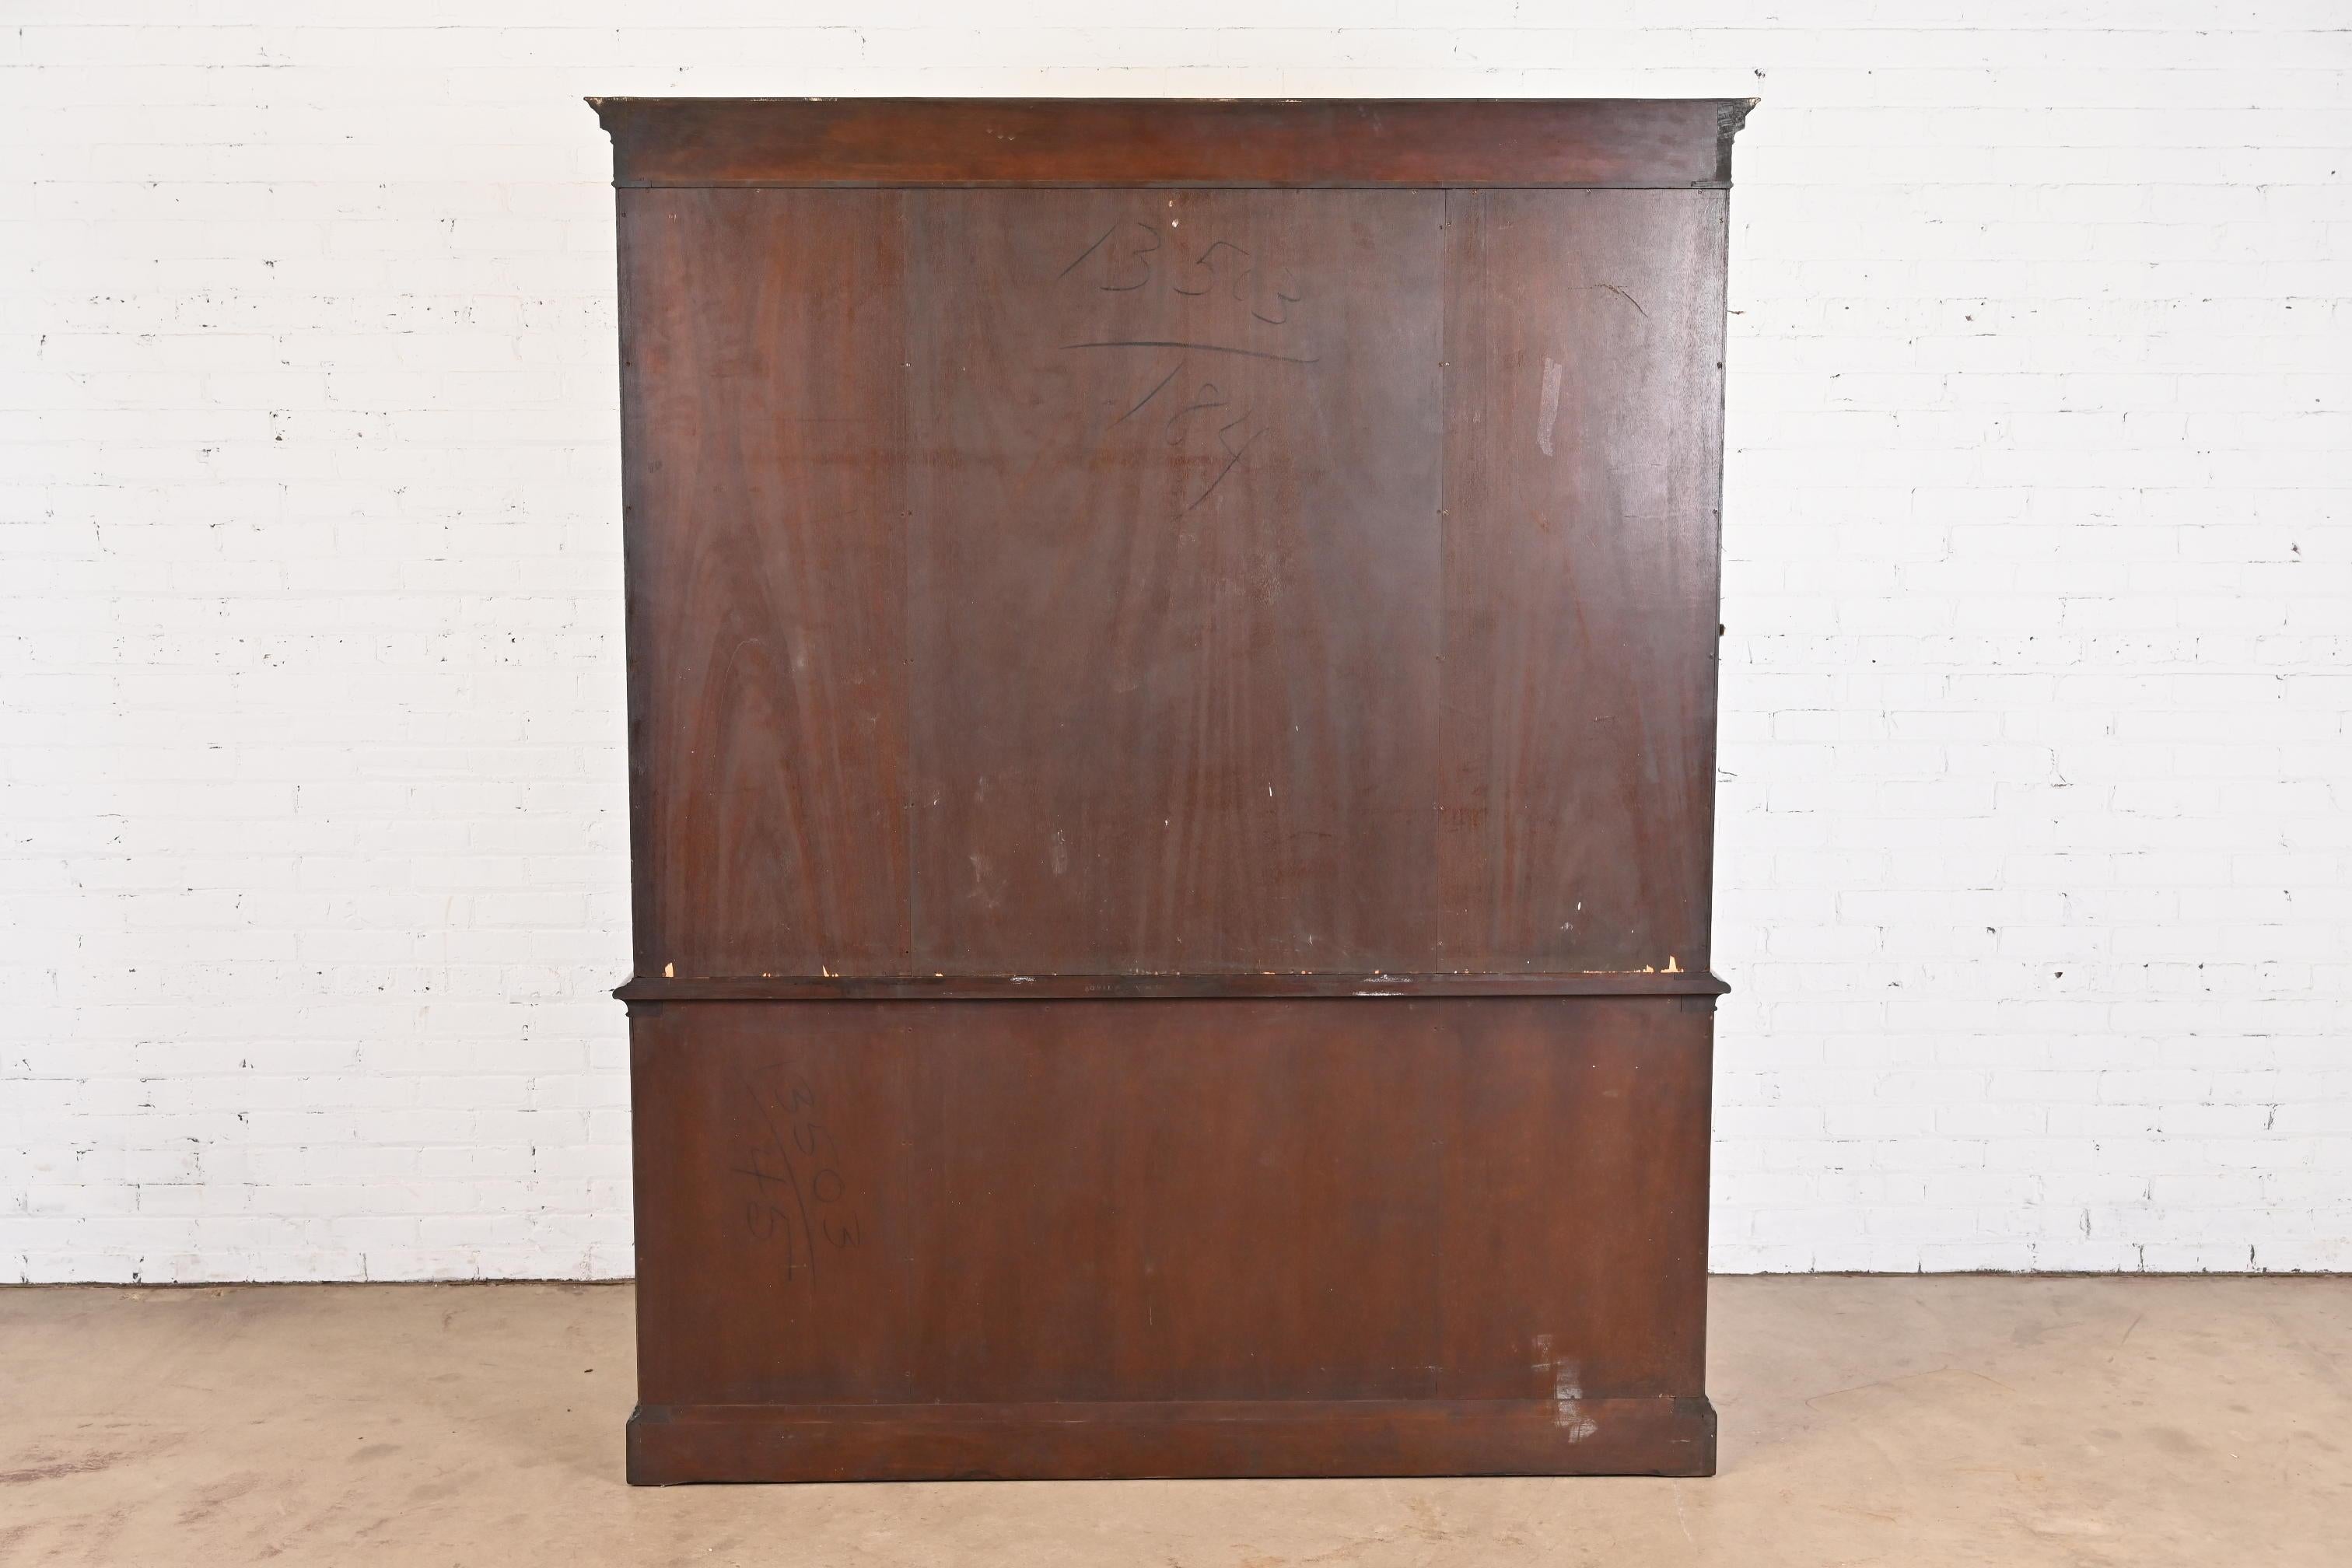 Schmieg & Kotzian Georgian Carved Mahogany Breakfront Bookcase Cabinet, 1940s For Sale 4